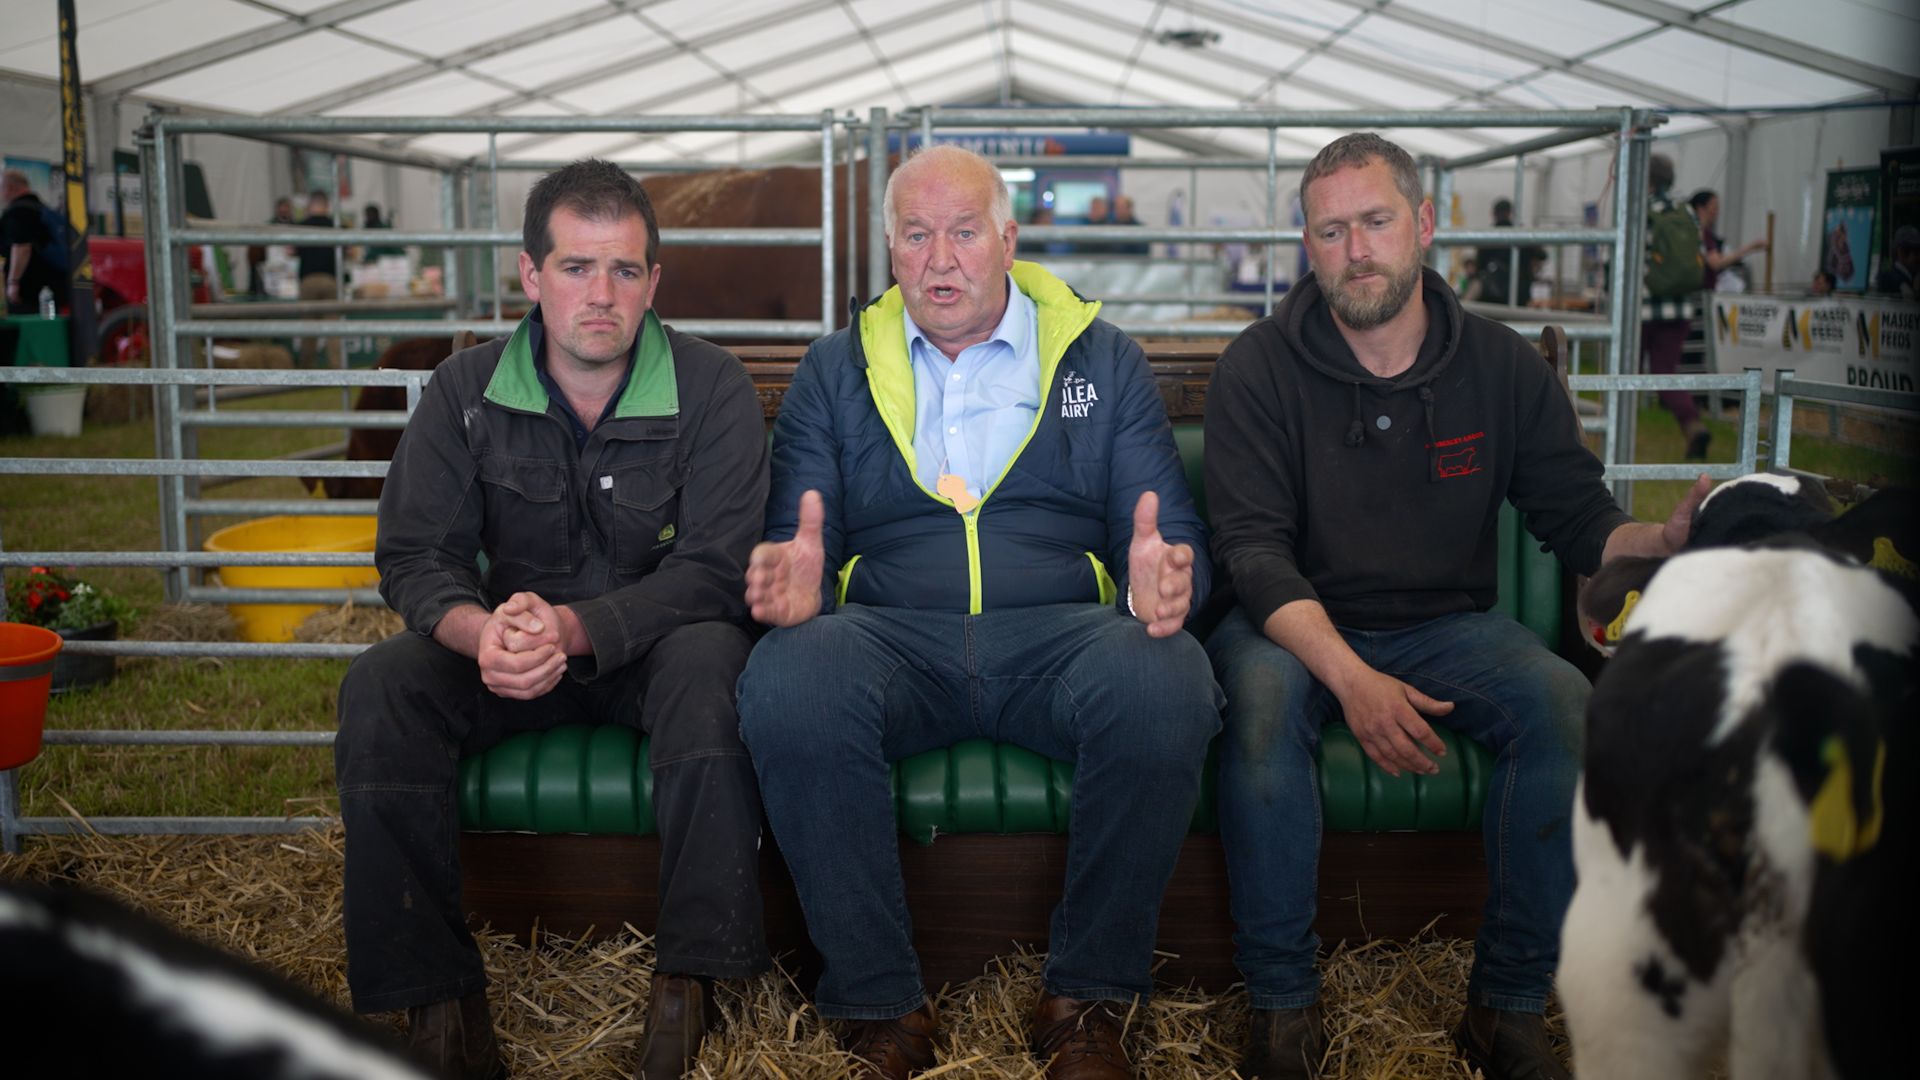 'We need more support': Farming community's verdict on election manifestos